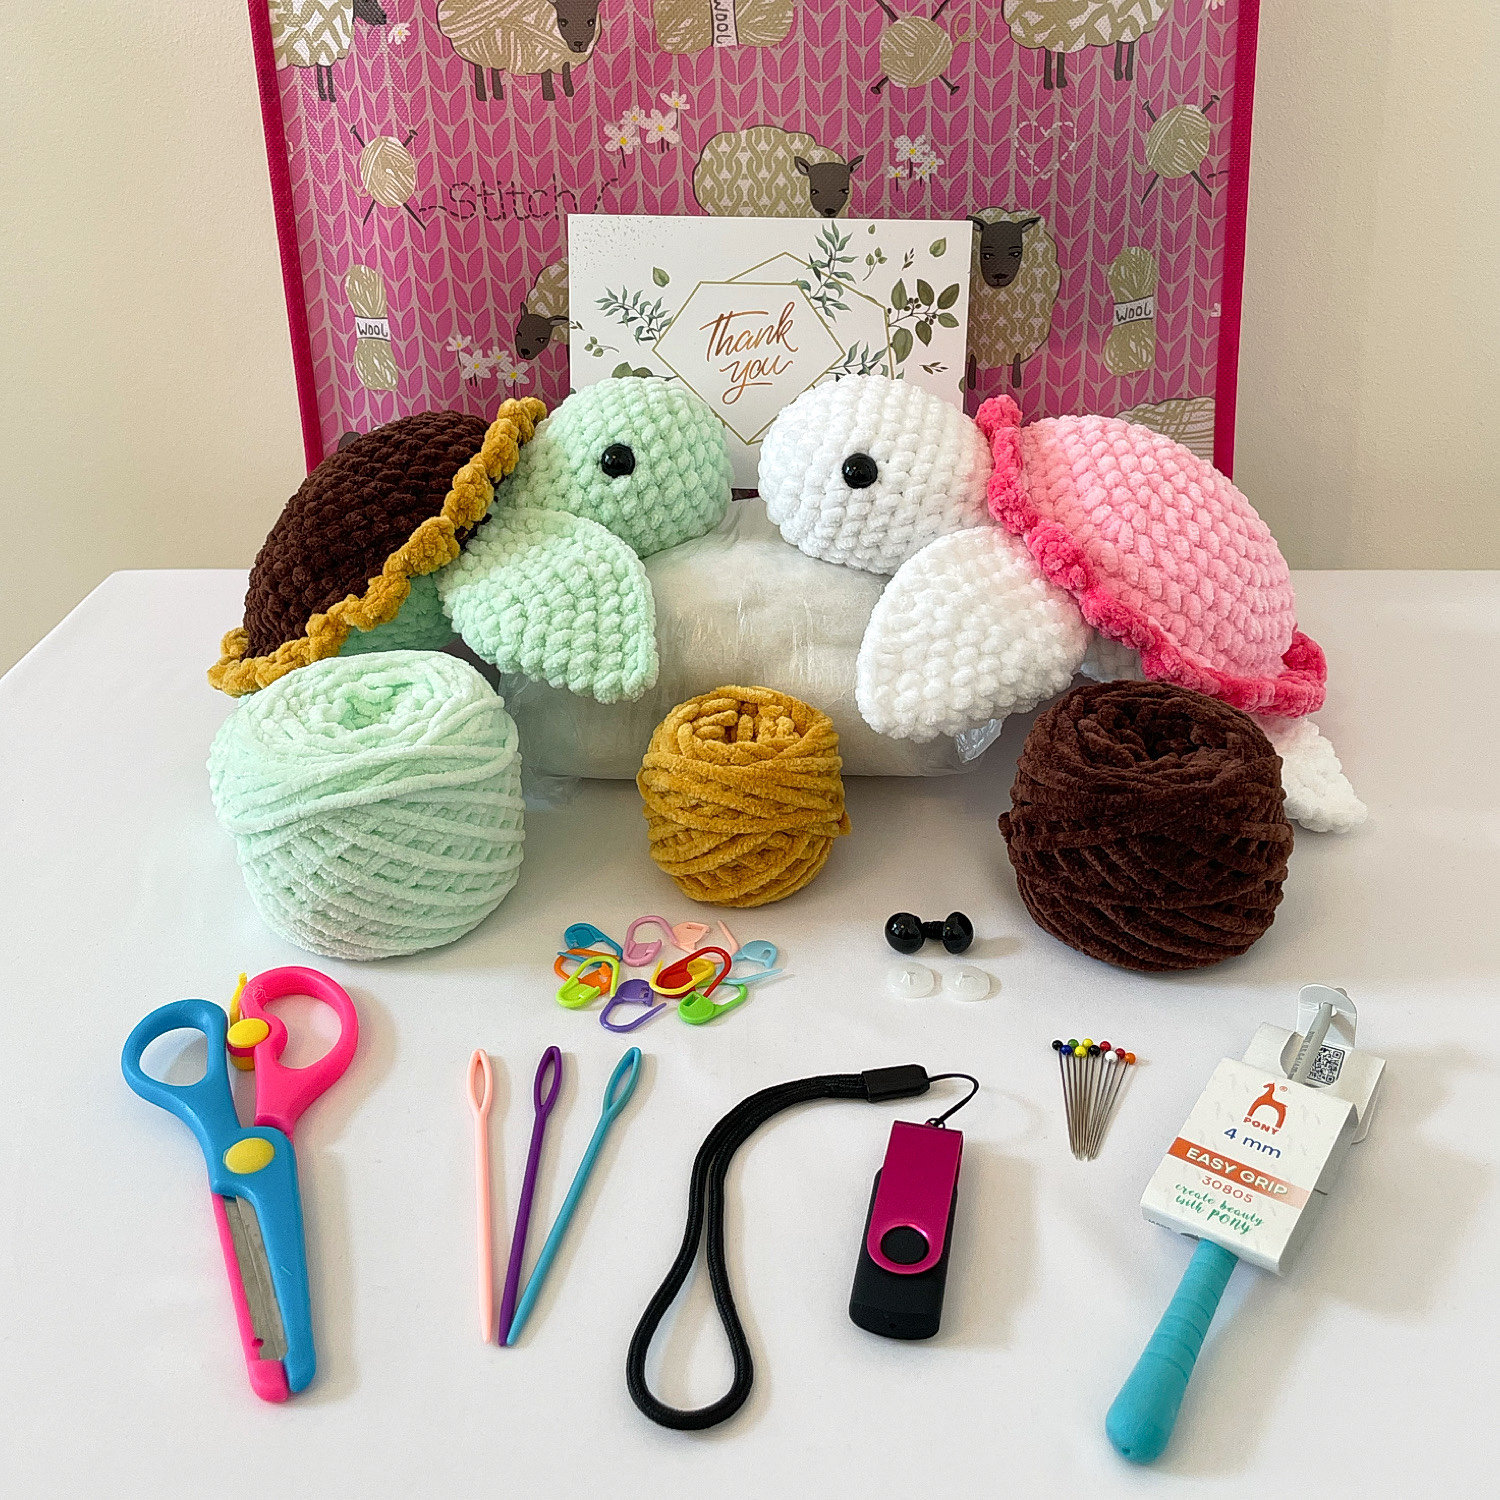 40 Woobles Crochet Patterns: Unleash Your Creativity Today!